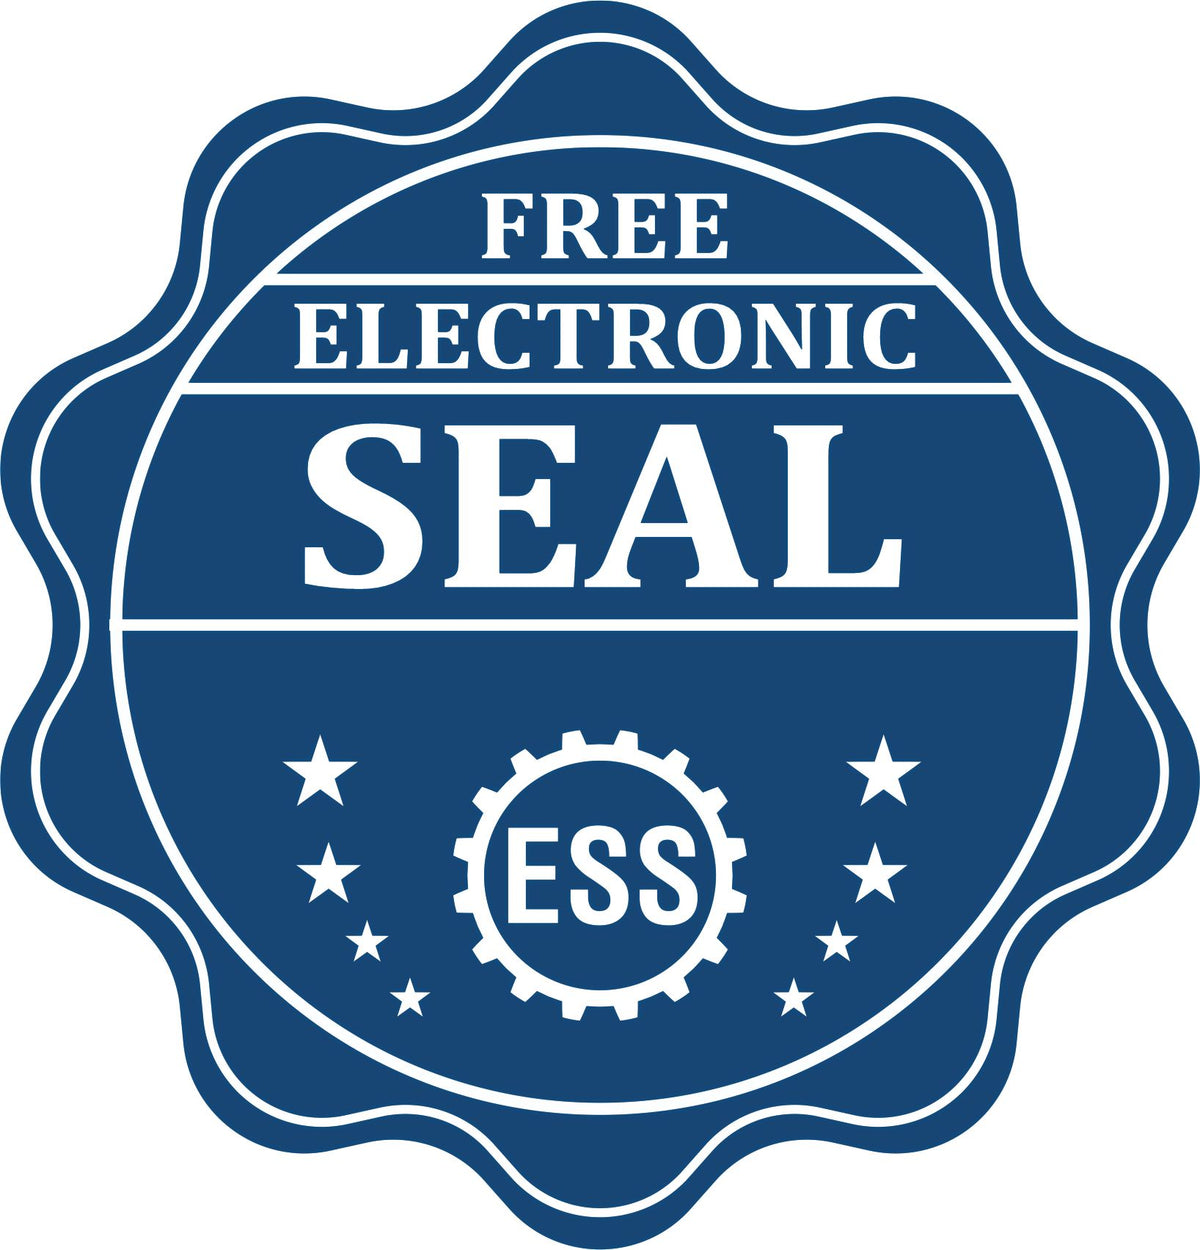 A badge showing a free electronic seal for the Premium MaxLight Pre-Inked Connecticut Landscape Architectural Stamp with stars and the ESS gear on the emblem.